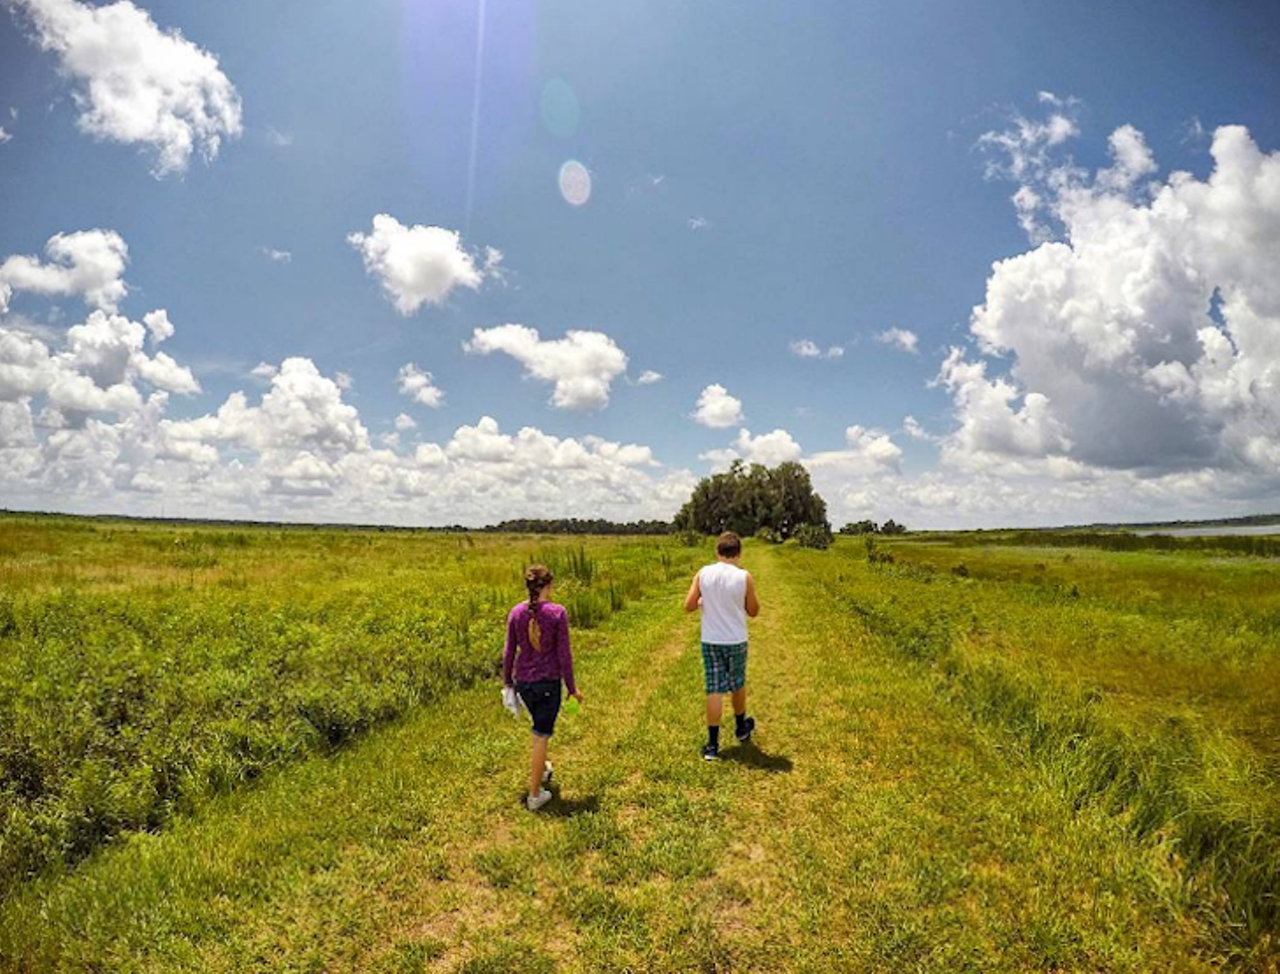 Twin Oaks Conservation Area
2001 Macy Island Road, Kissimmee, FL 34744
This easy grassy trail runs through reclaimed cattle land. Hikers are sure to spot some feathered wildlife in the tall grasses and huge oak trees that line the 1.9 mile path. 
Photo via ddsejak/Instagram